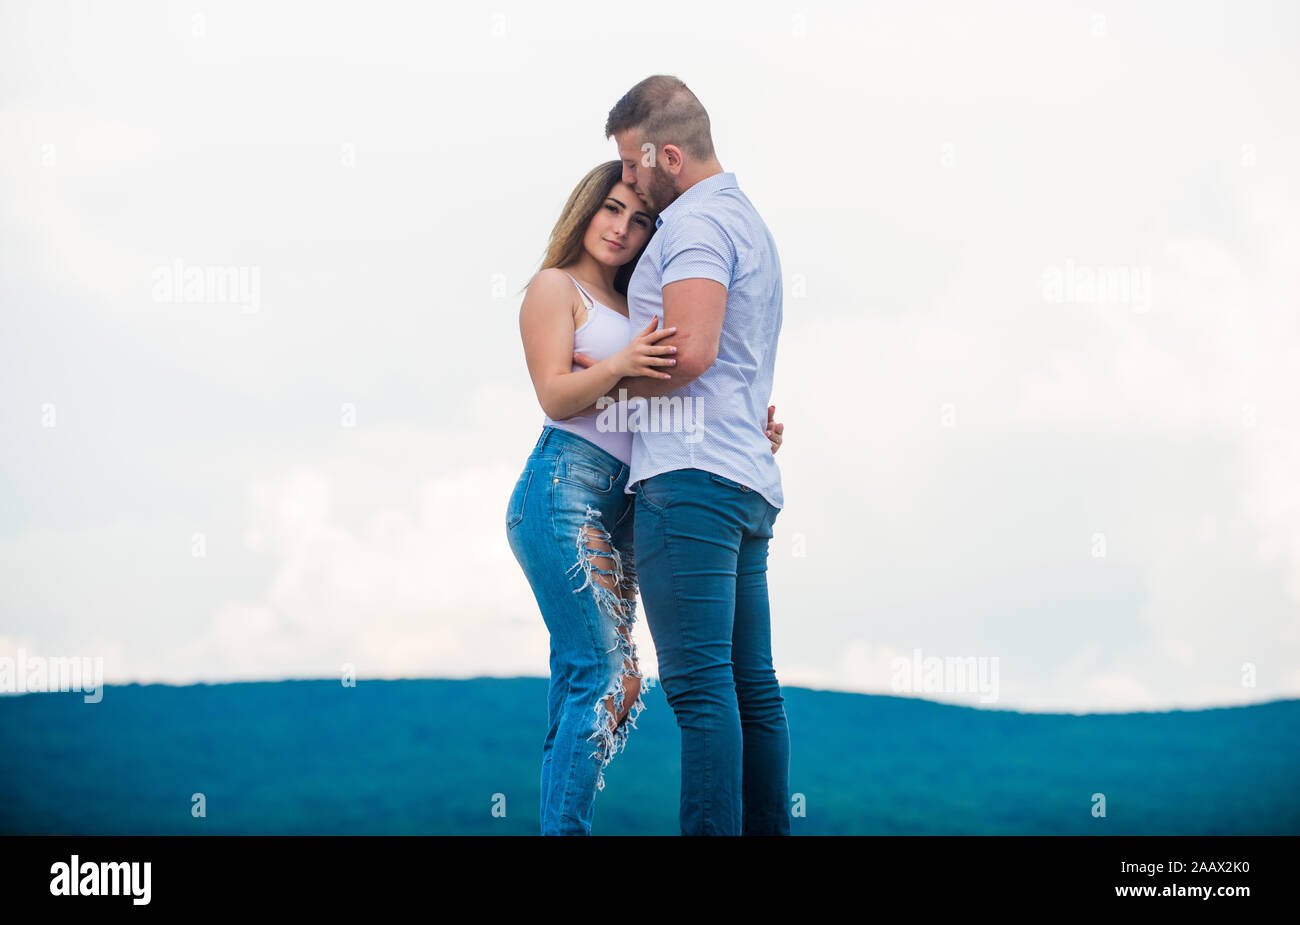 Romantic relations. True love. Family love. Couple in love. Cute relationship. Man and woman cuddle nature background. Supporting her. Together forever. Love story. Just married. Honeymoon concept. Stock Photo